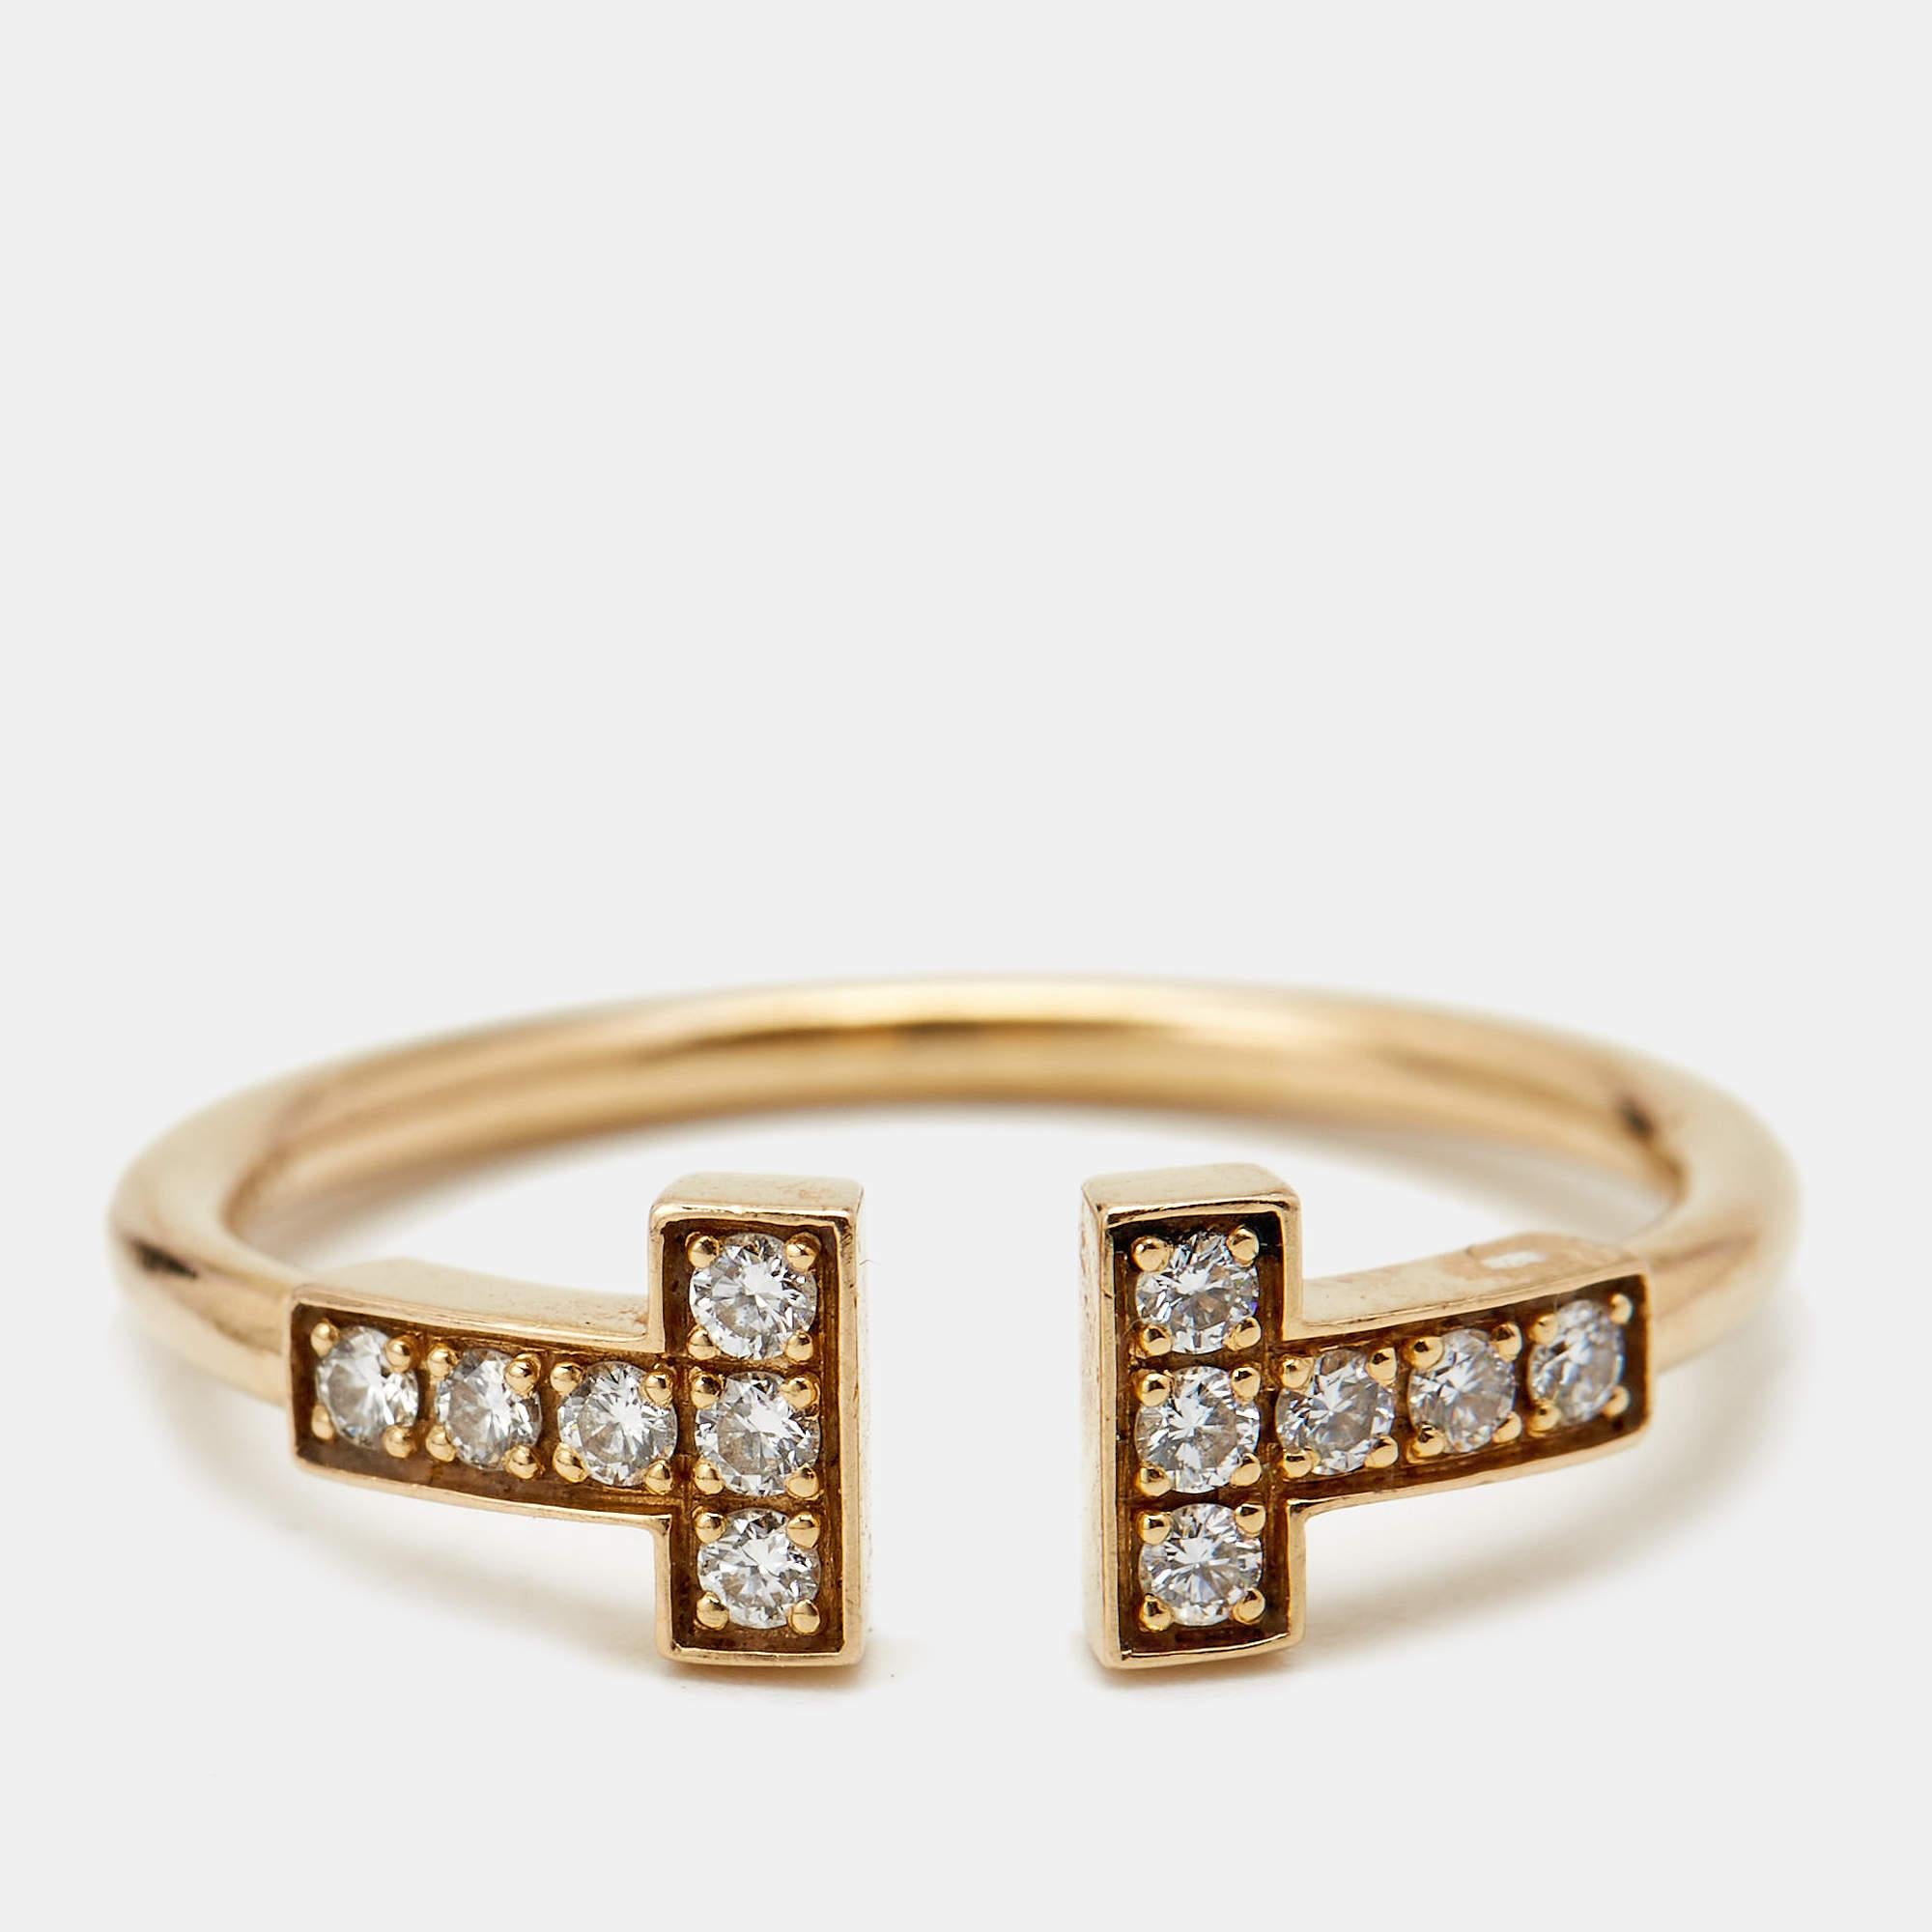 The Tiffany T collection is one of the most popular jewelry lines from Tiffany & Co. Each piece comes with a distinct shape that displays or re-interprets the 'T' symbol. This Tiffany T Wire ring is crafted from 18k rose gold and styled as an open